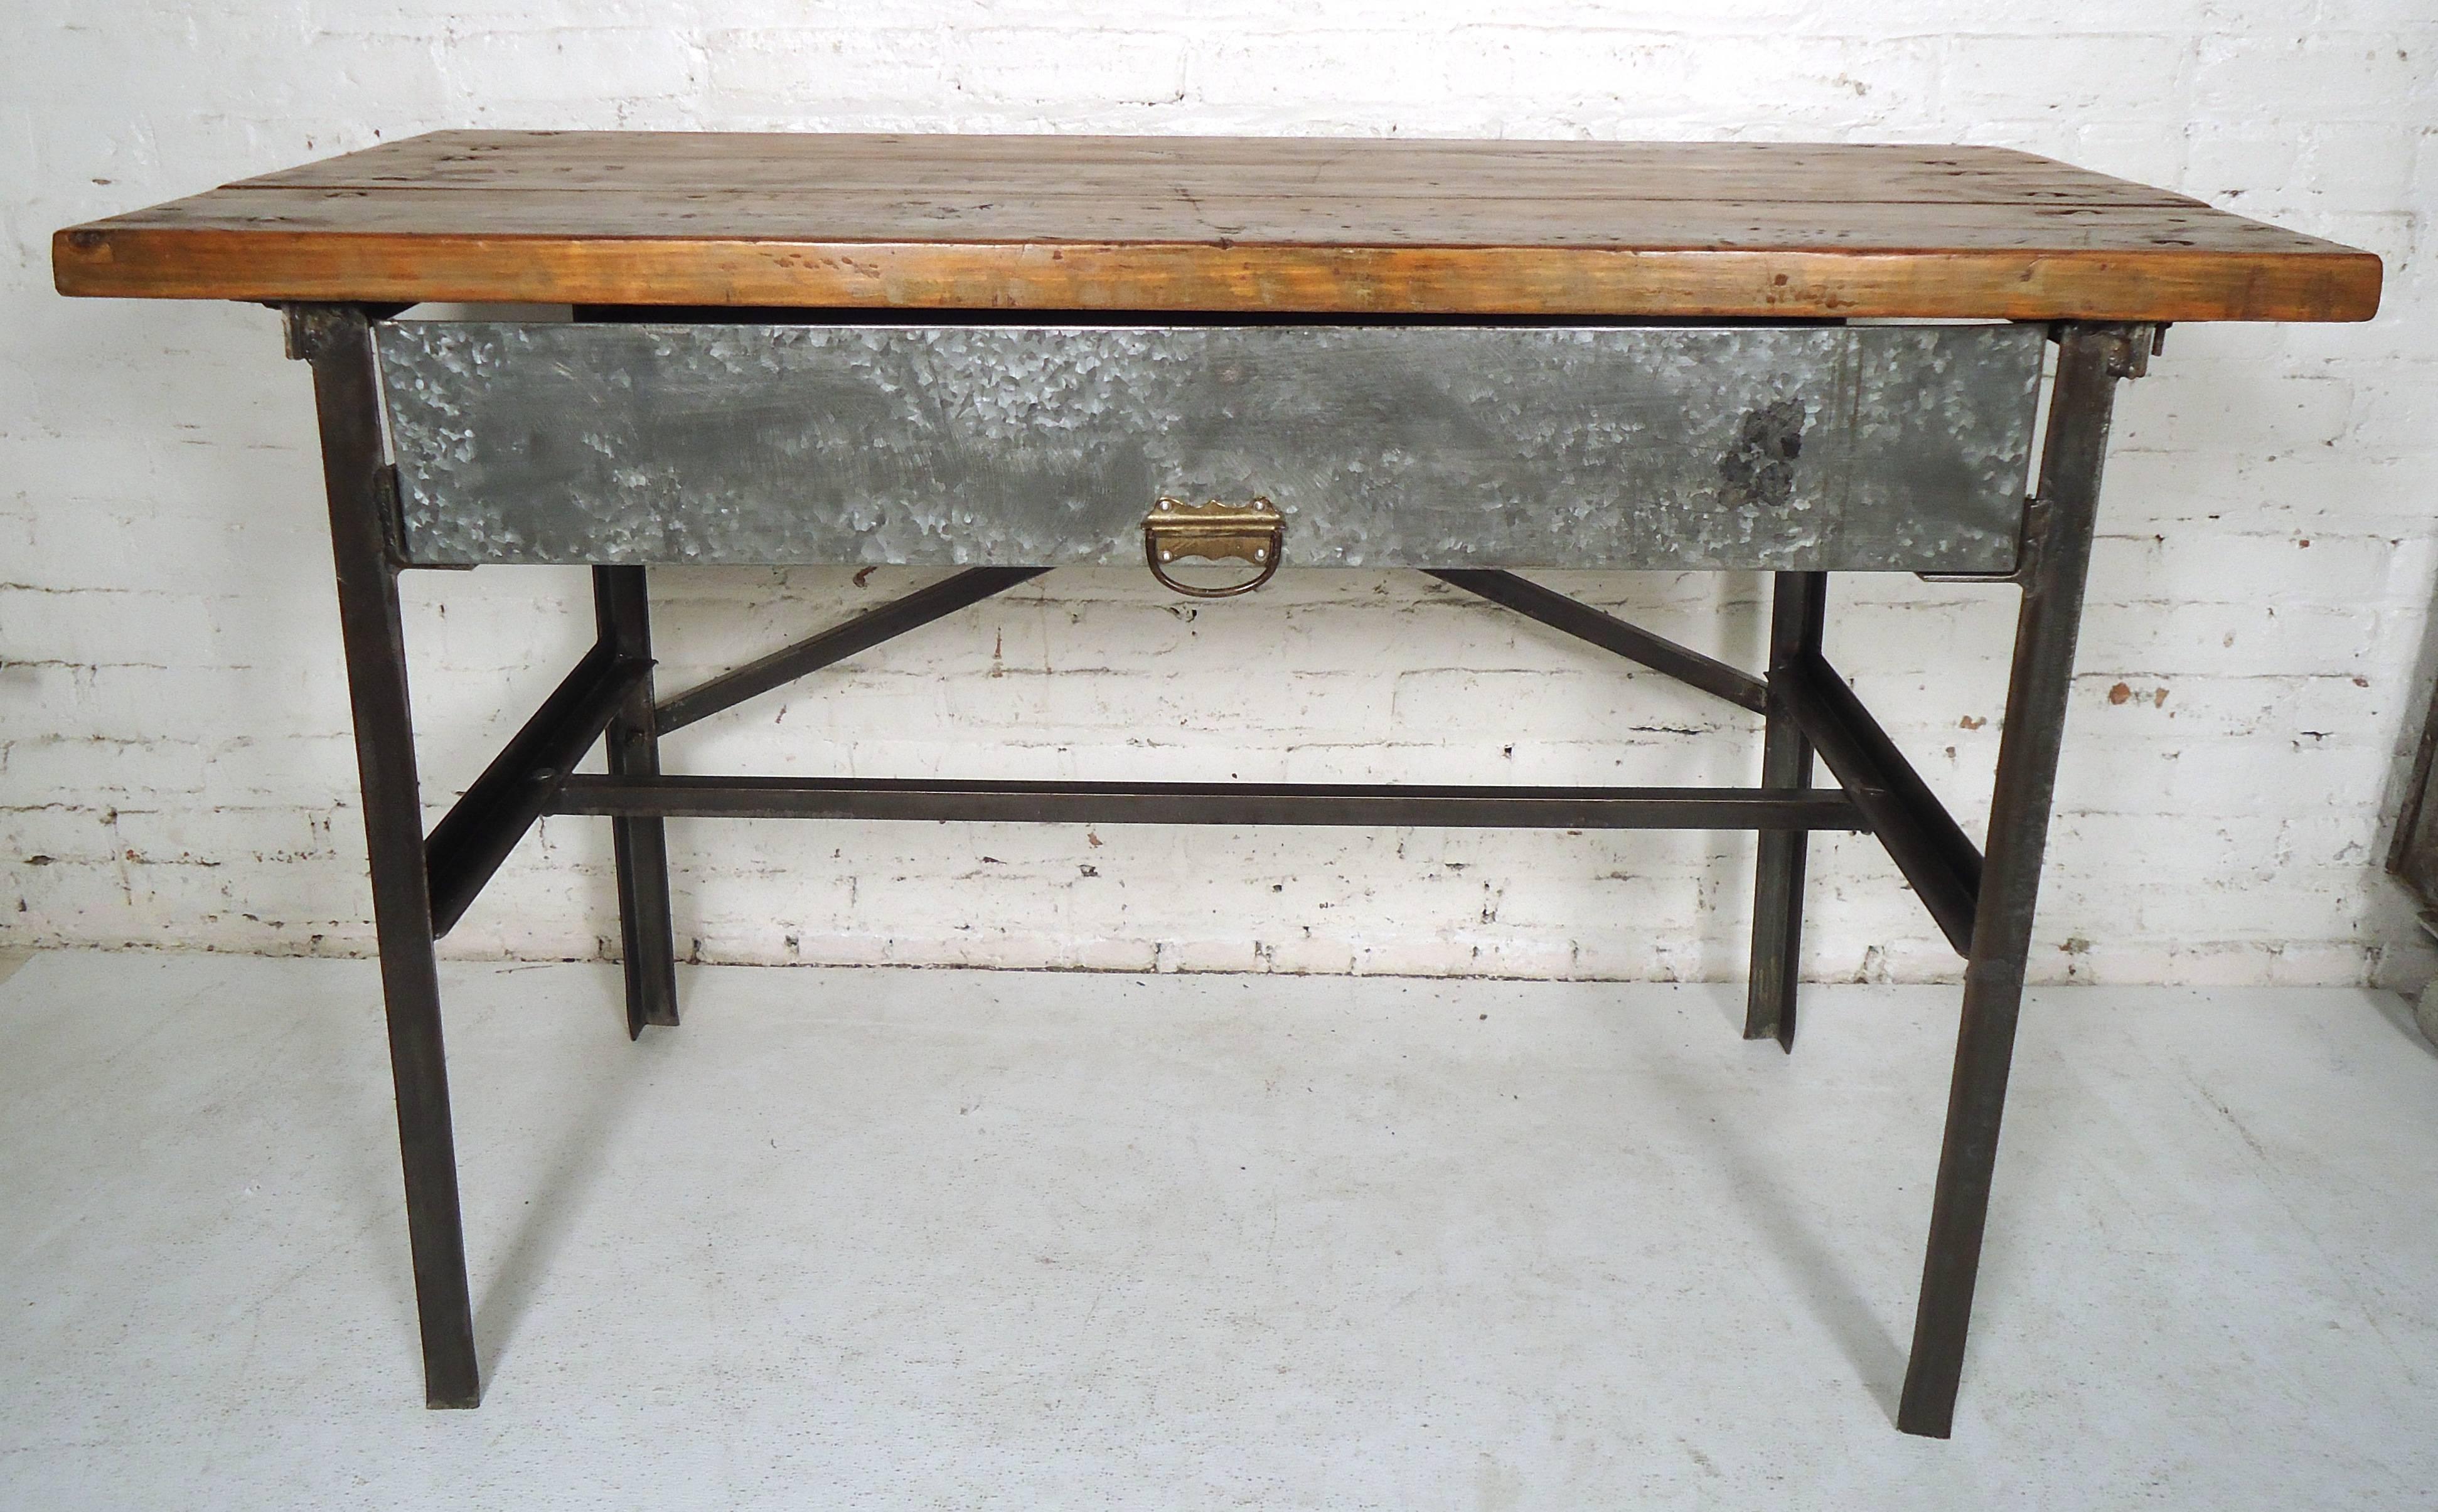 Butcher block top factory table with metal base. Metal has been stripped to bare metal and lacquered for a handsome industrial look, which can take this vintage workshop table into your modern home.

(Please confirm item location, NY or NJ, with